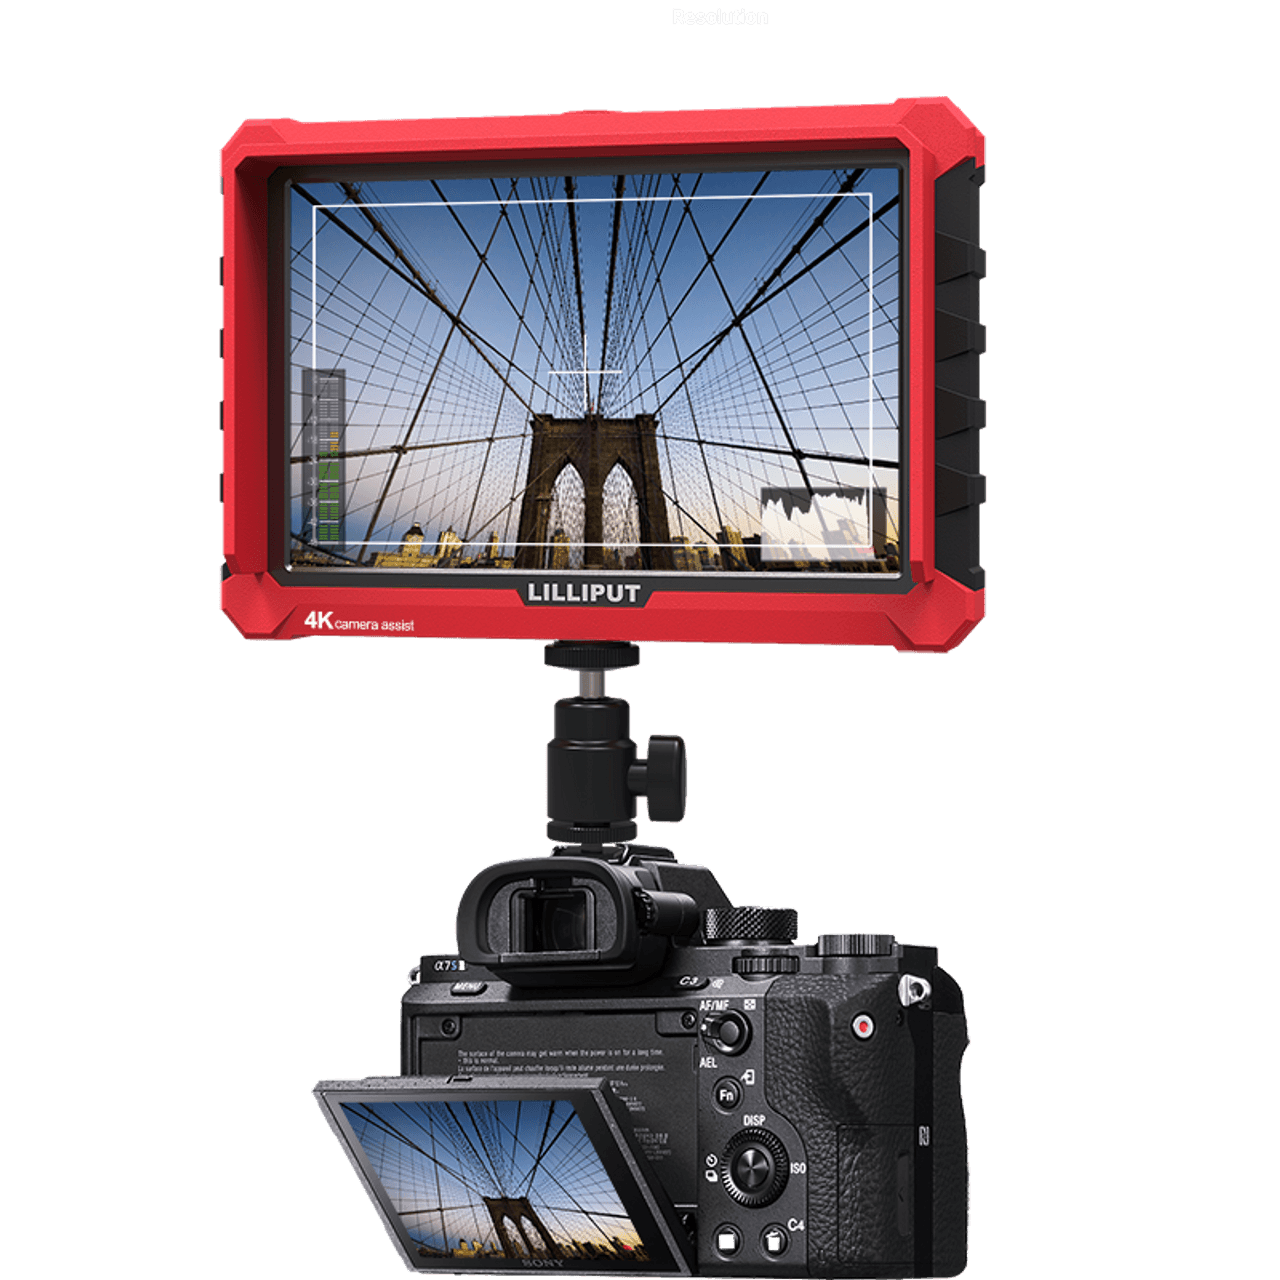 Lilliput A7S 7 Inch Full HD Monitor with 4K Camera Assist